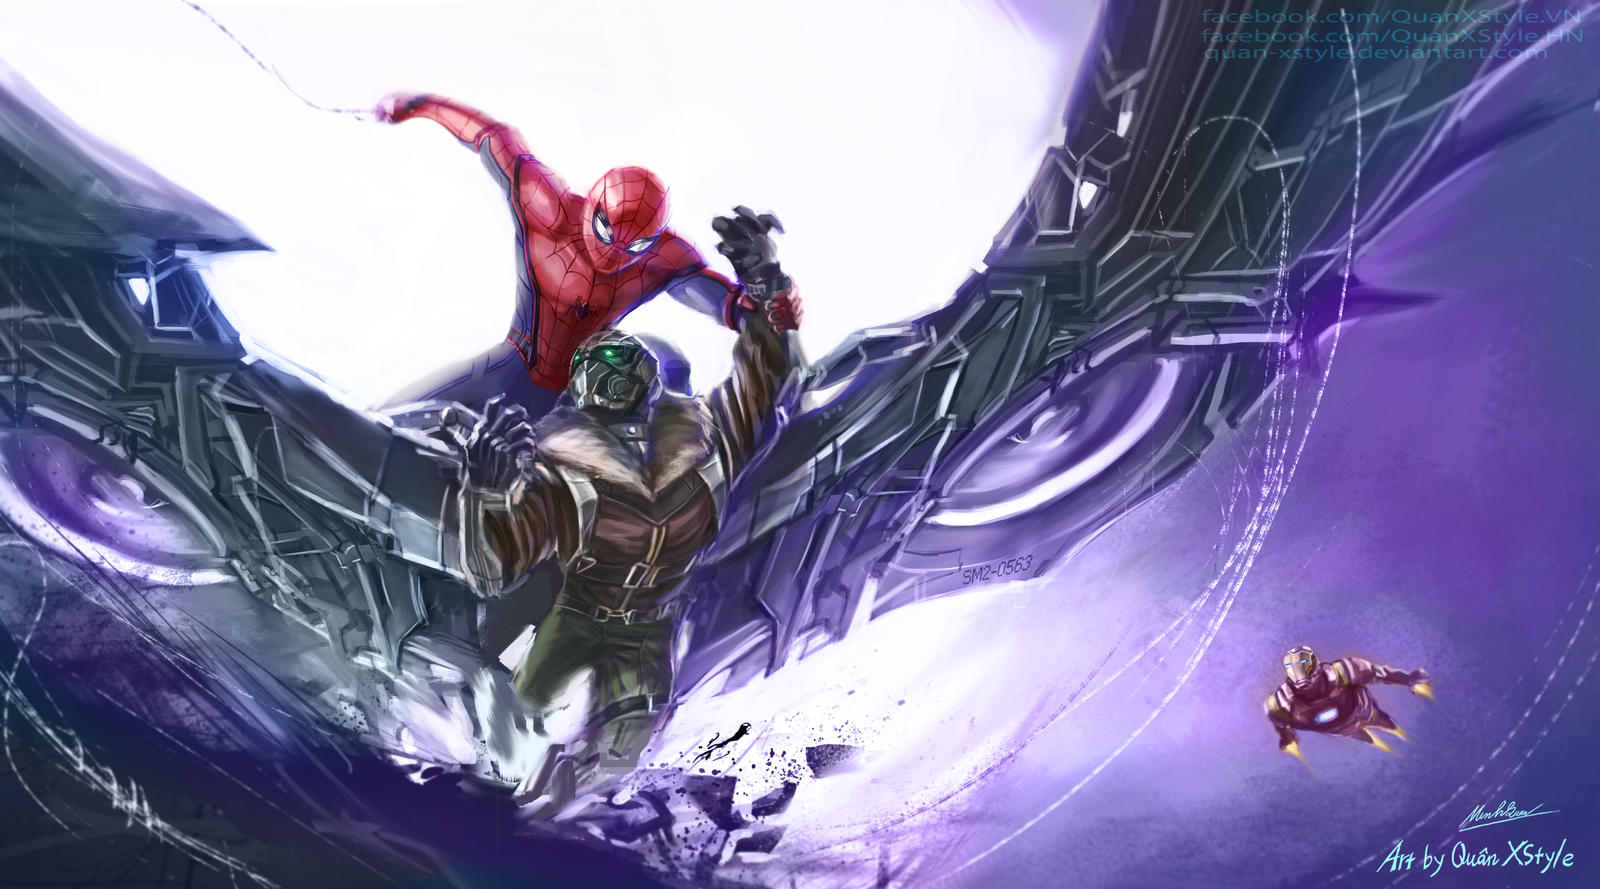 Spider-man homecoming: Spider-man capture Vulture by Quan-Xstyle on  DeviantArt